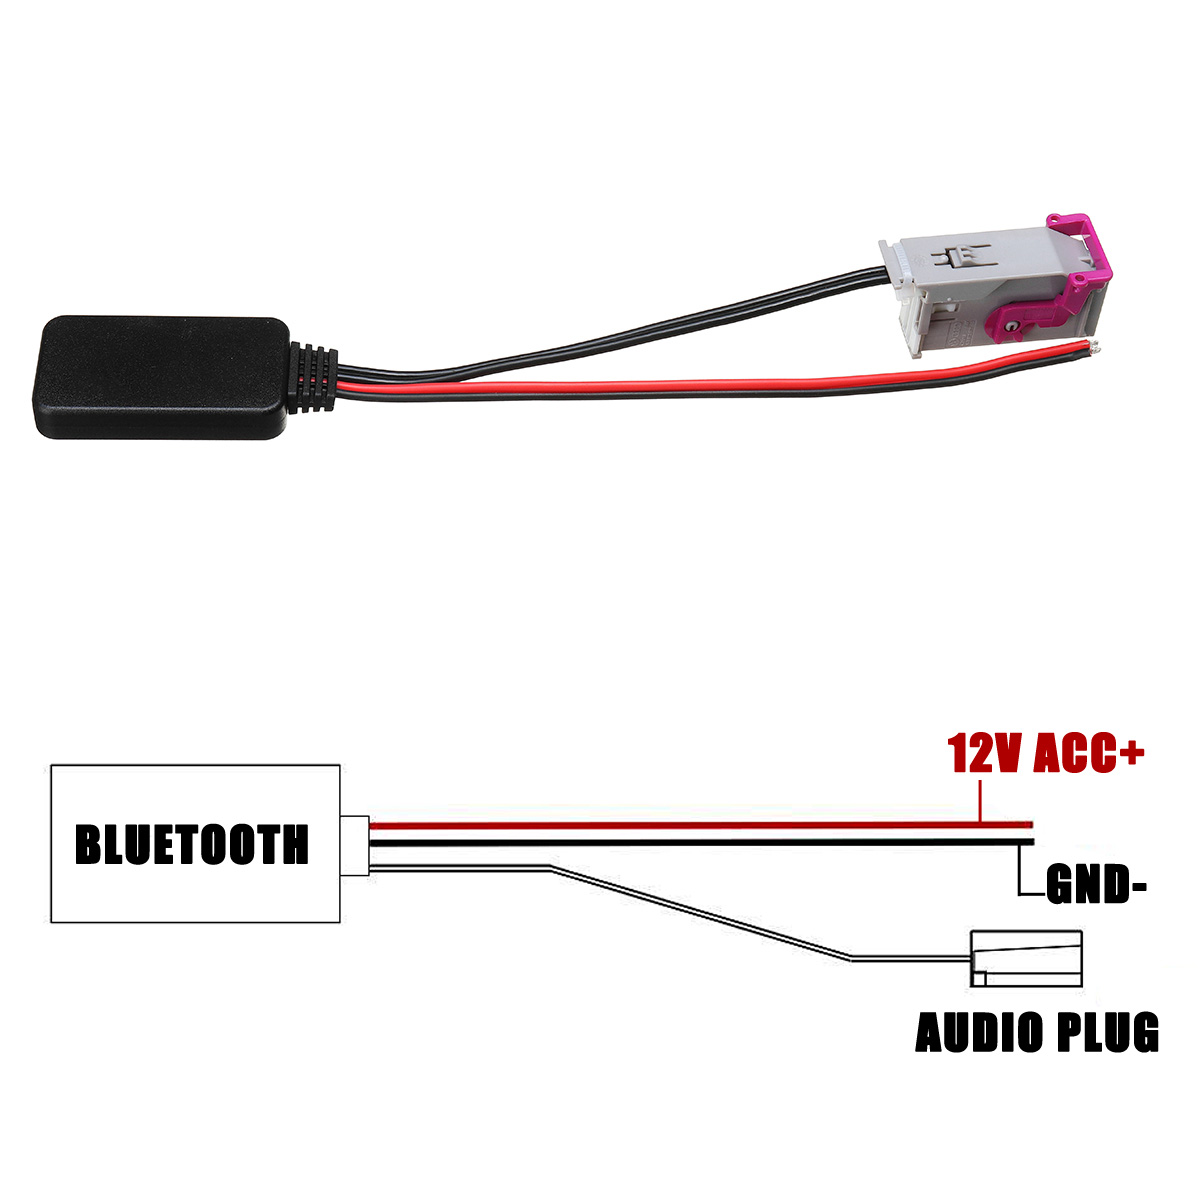 32-pin-bluetooth-Module-Audio-Aux-Cable-Adapter-For-Audi-A3-A4-A6-A8-TT-R8-RNS-E-1372322-2